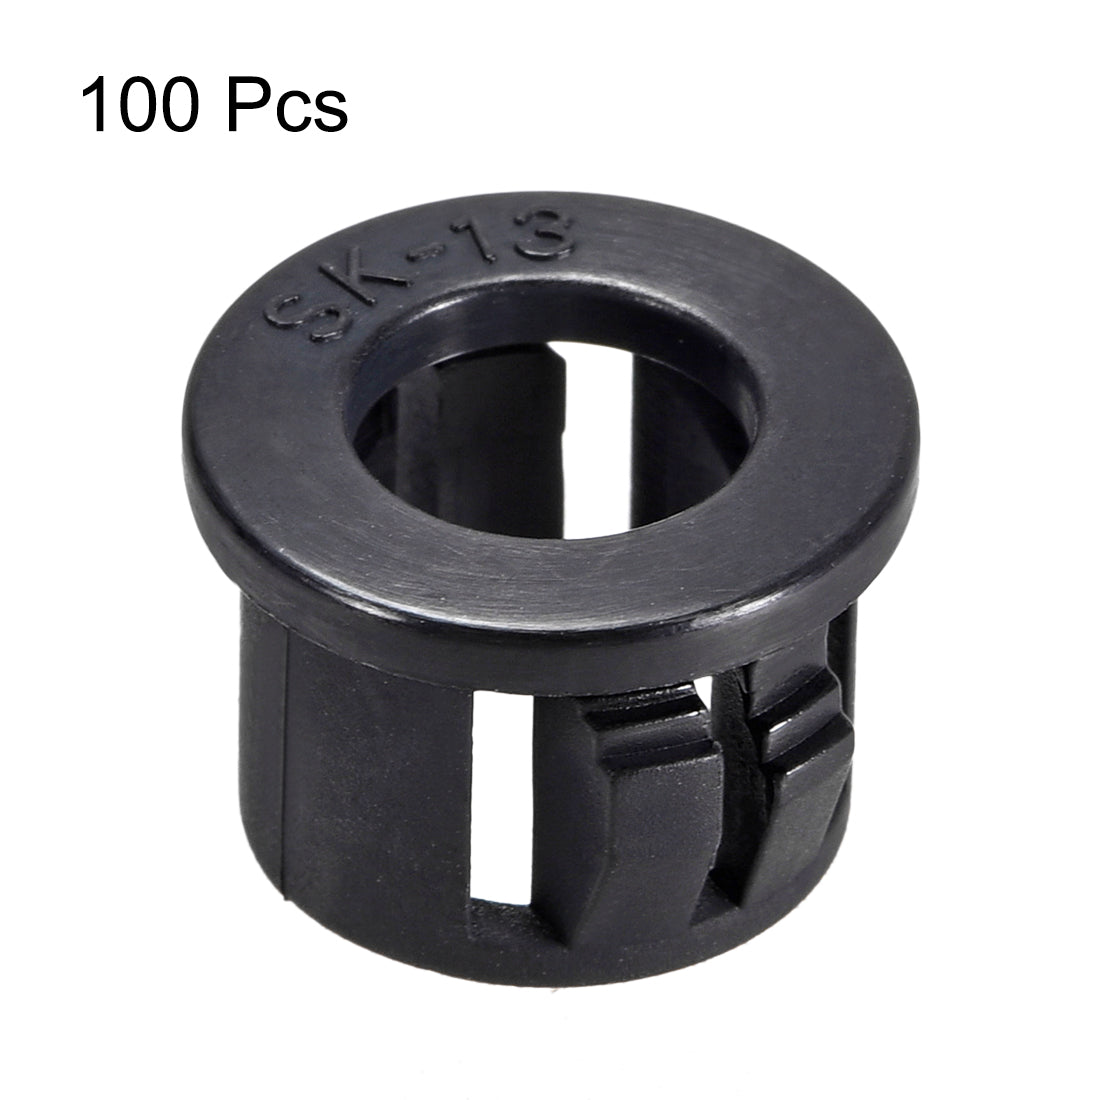 Uxcell Uxcell 13mm Mounted Dia Snap in Cable Hose Bushing Grommet Protector Black 100pcs